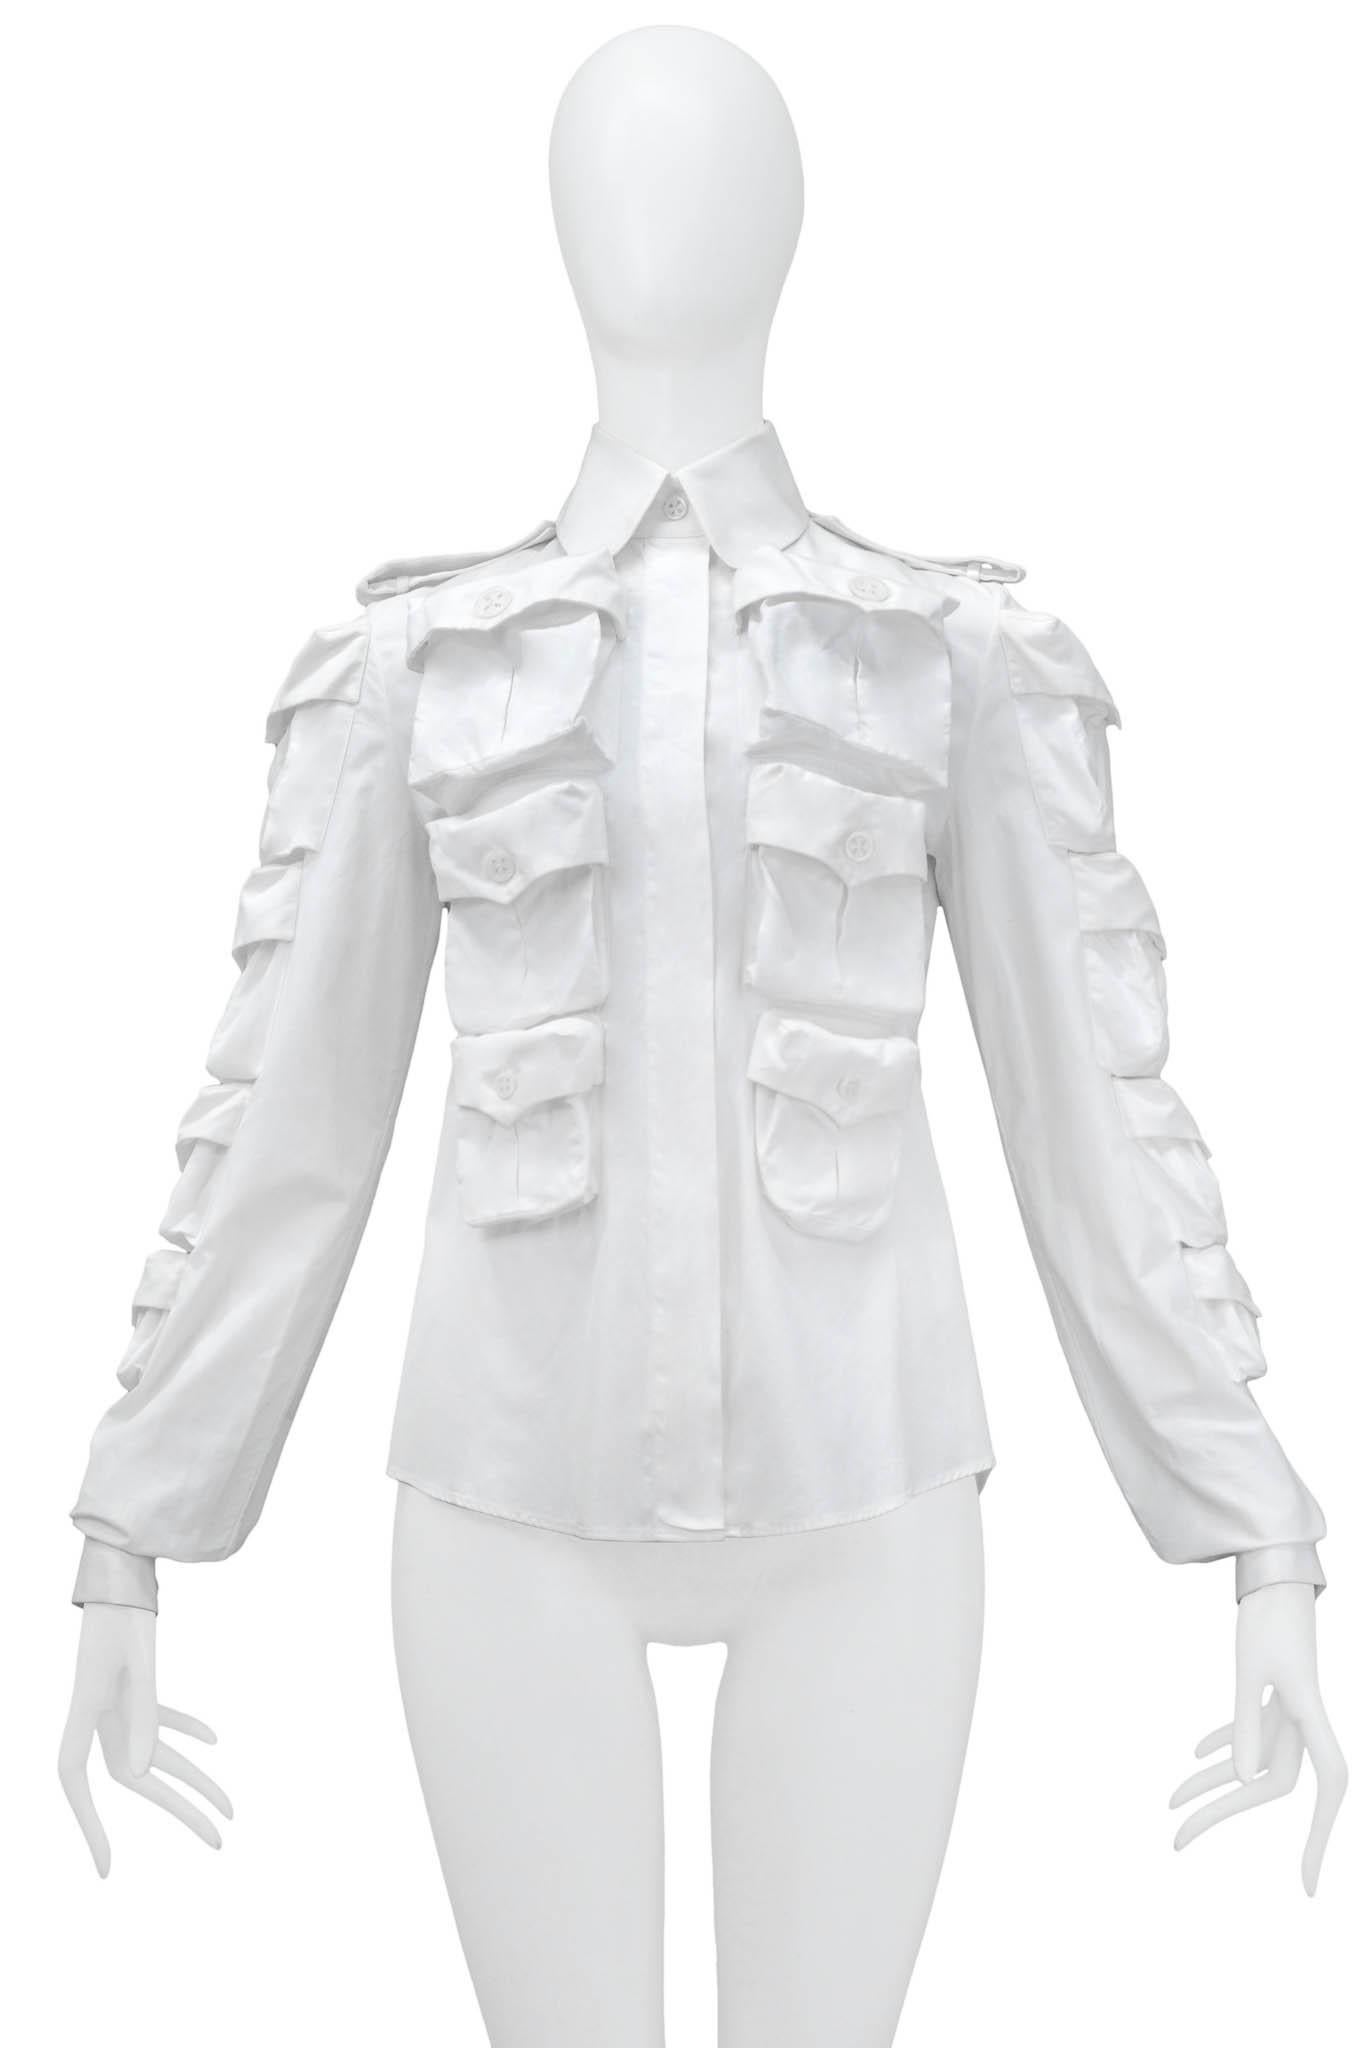 Resurrection Vintage is excited to present a vintage Viktor & Rolf white multi-pocket button-down featuring, pockets on the front, back, and sleeves, a pointed collar, and shirt epaulets.

Viktor & Rolf
Size: S
Cotton
Circa 2002
Excellent Vintage